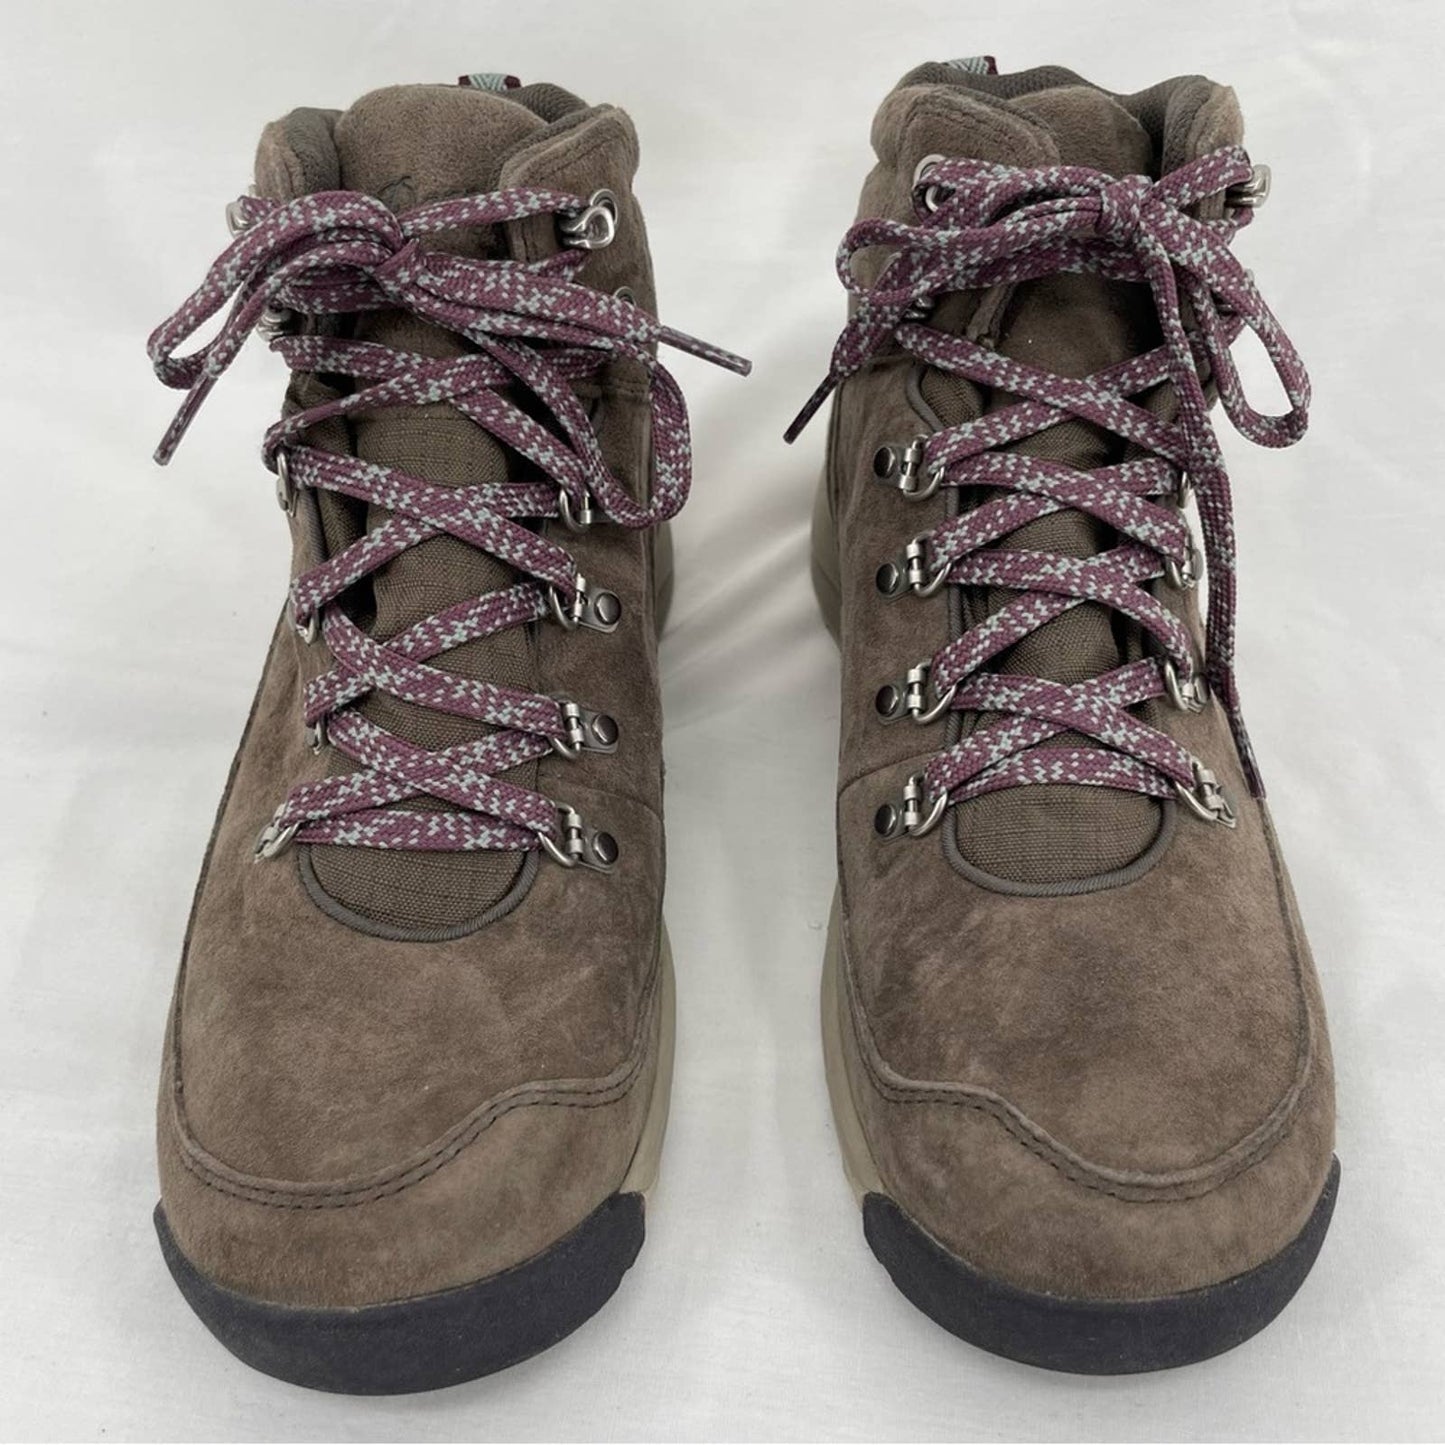 Danner Adrika Hiker Ash Water-resistant Suede Classic Taupe Tan Hiking Boots Size 10